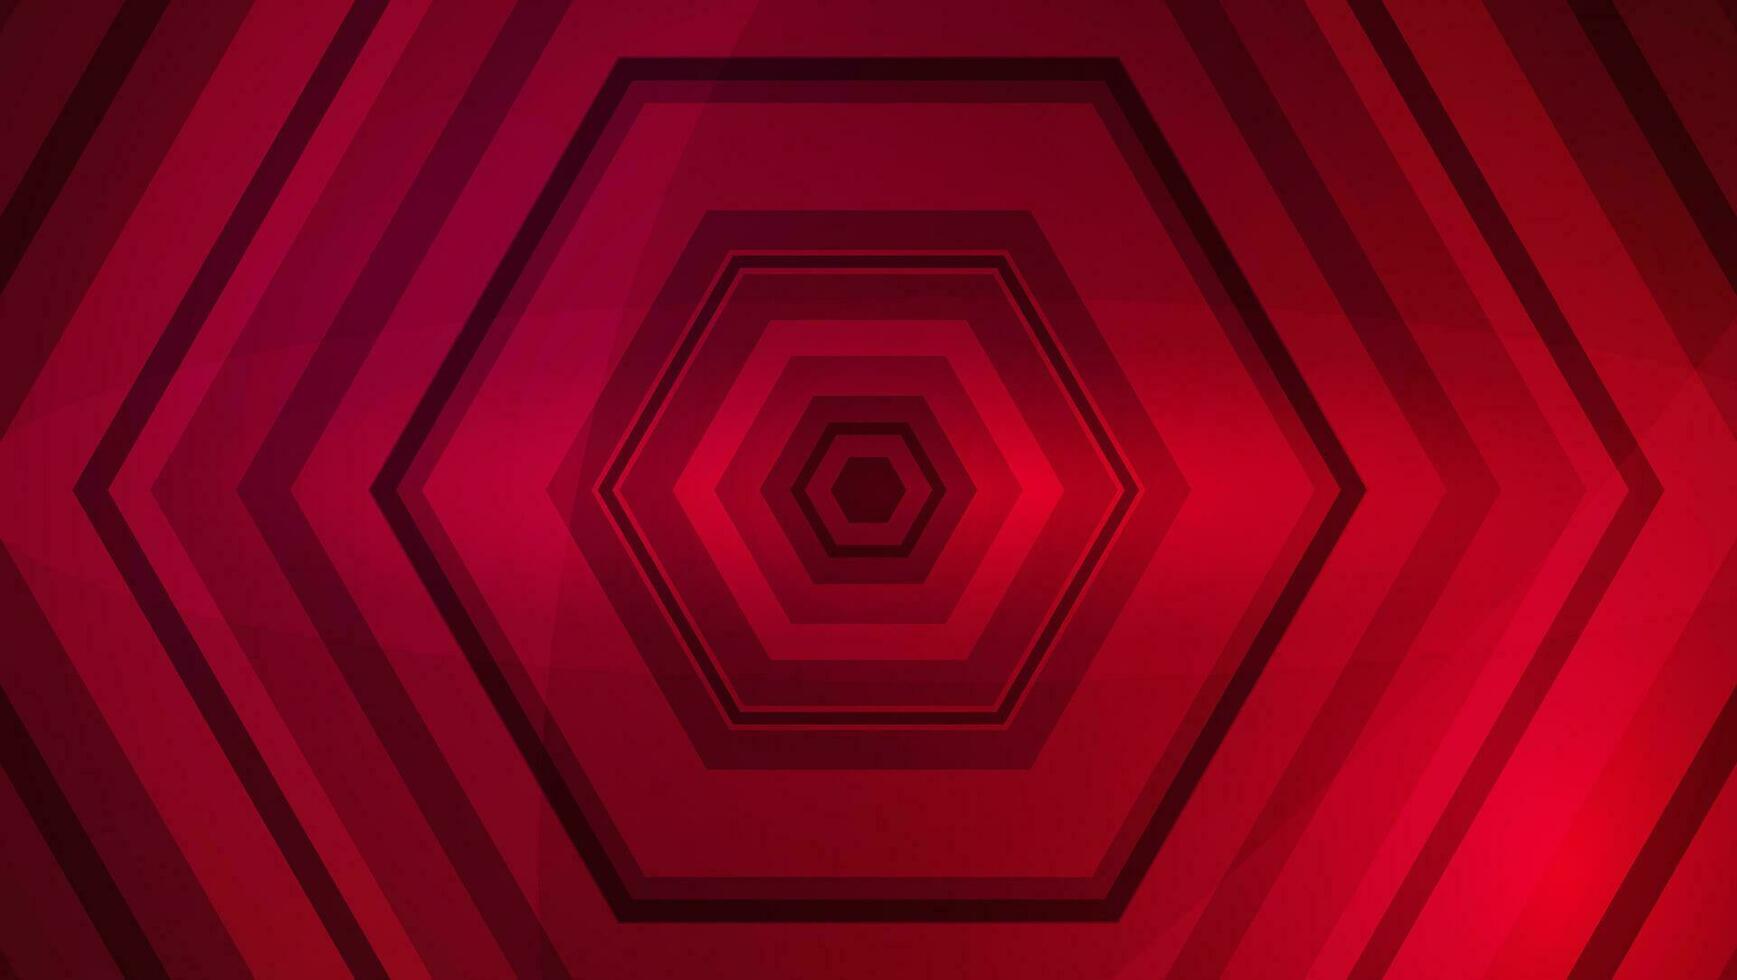 Crimson Geometry Clean and Simple Red Geometric Background vector